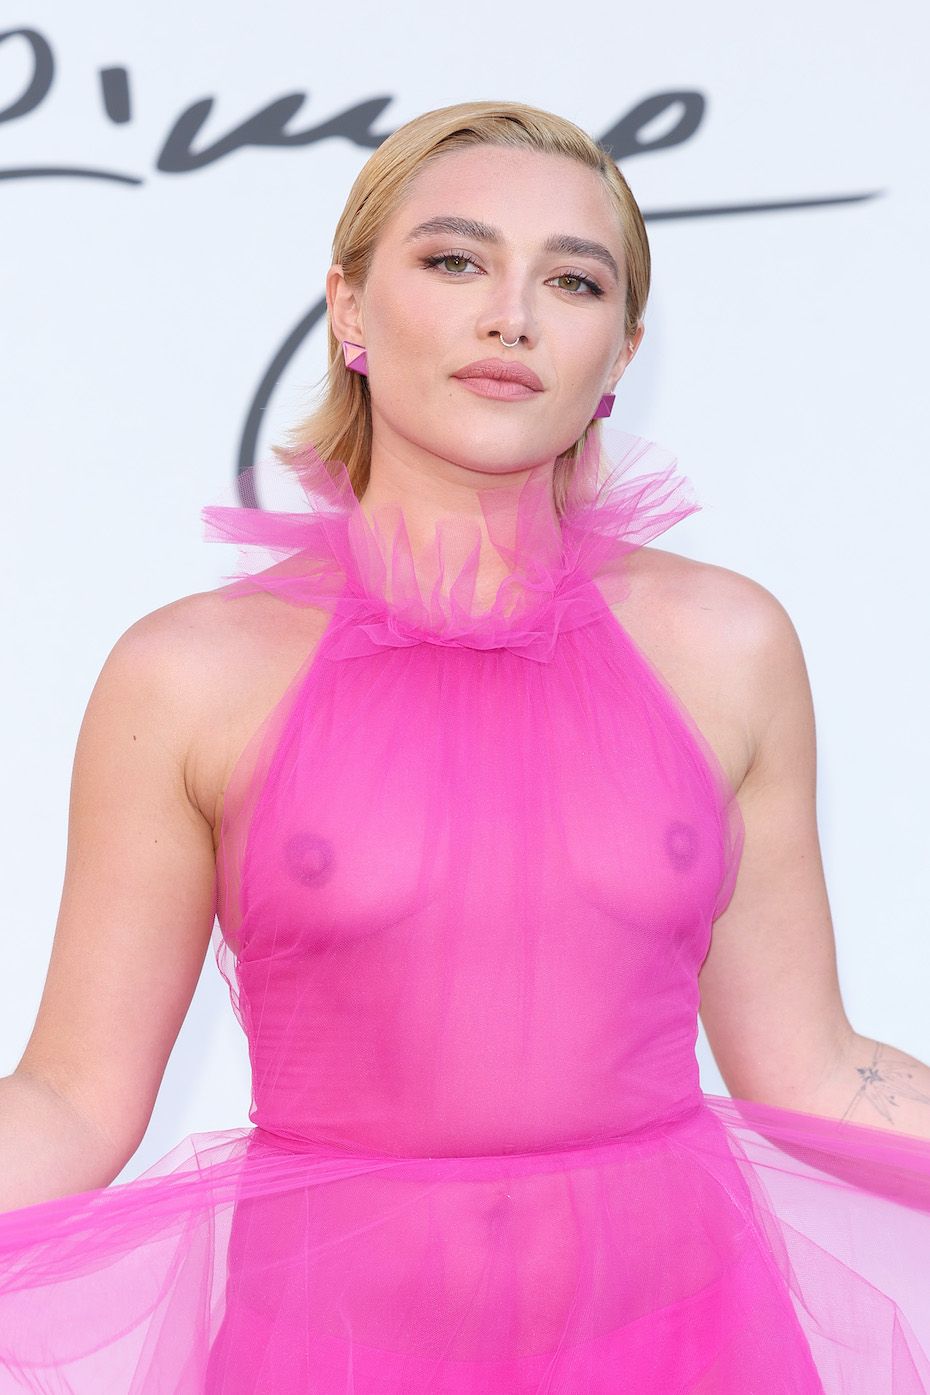 Florence Pugh 18 facts about the Yelena Belova actress you need to know   PopBuzz